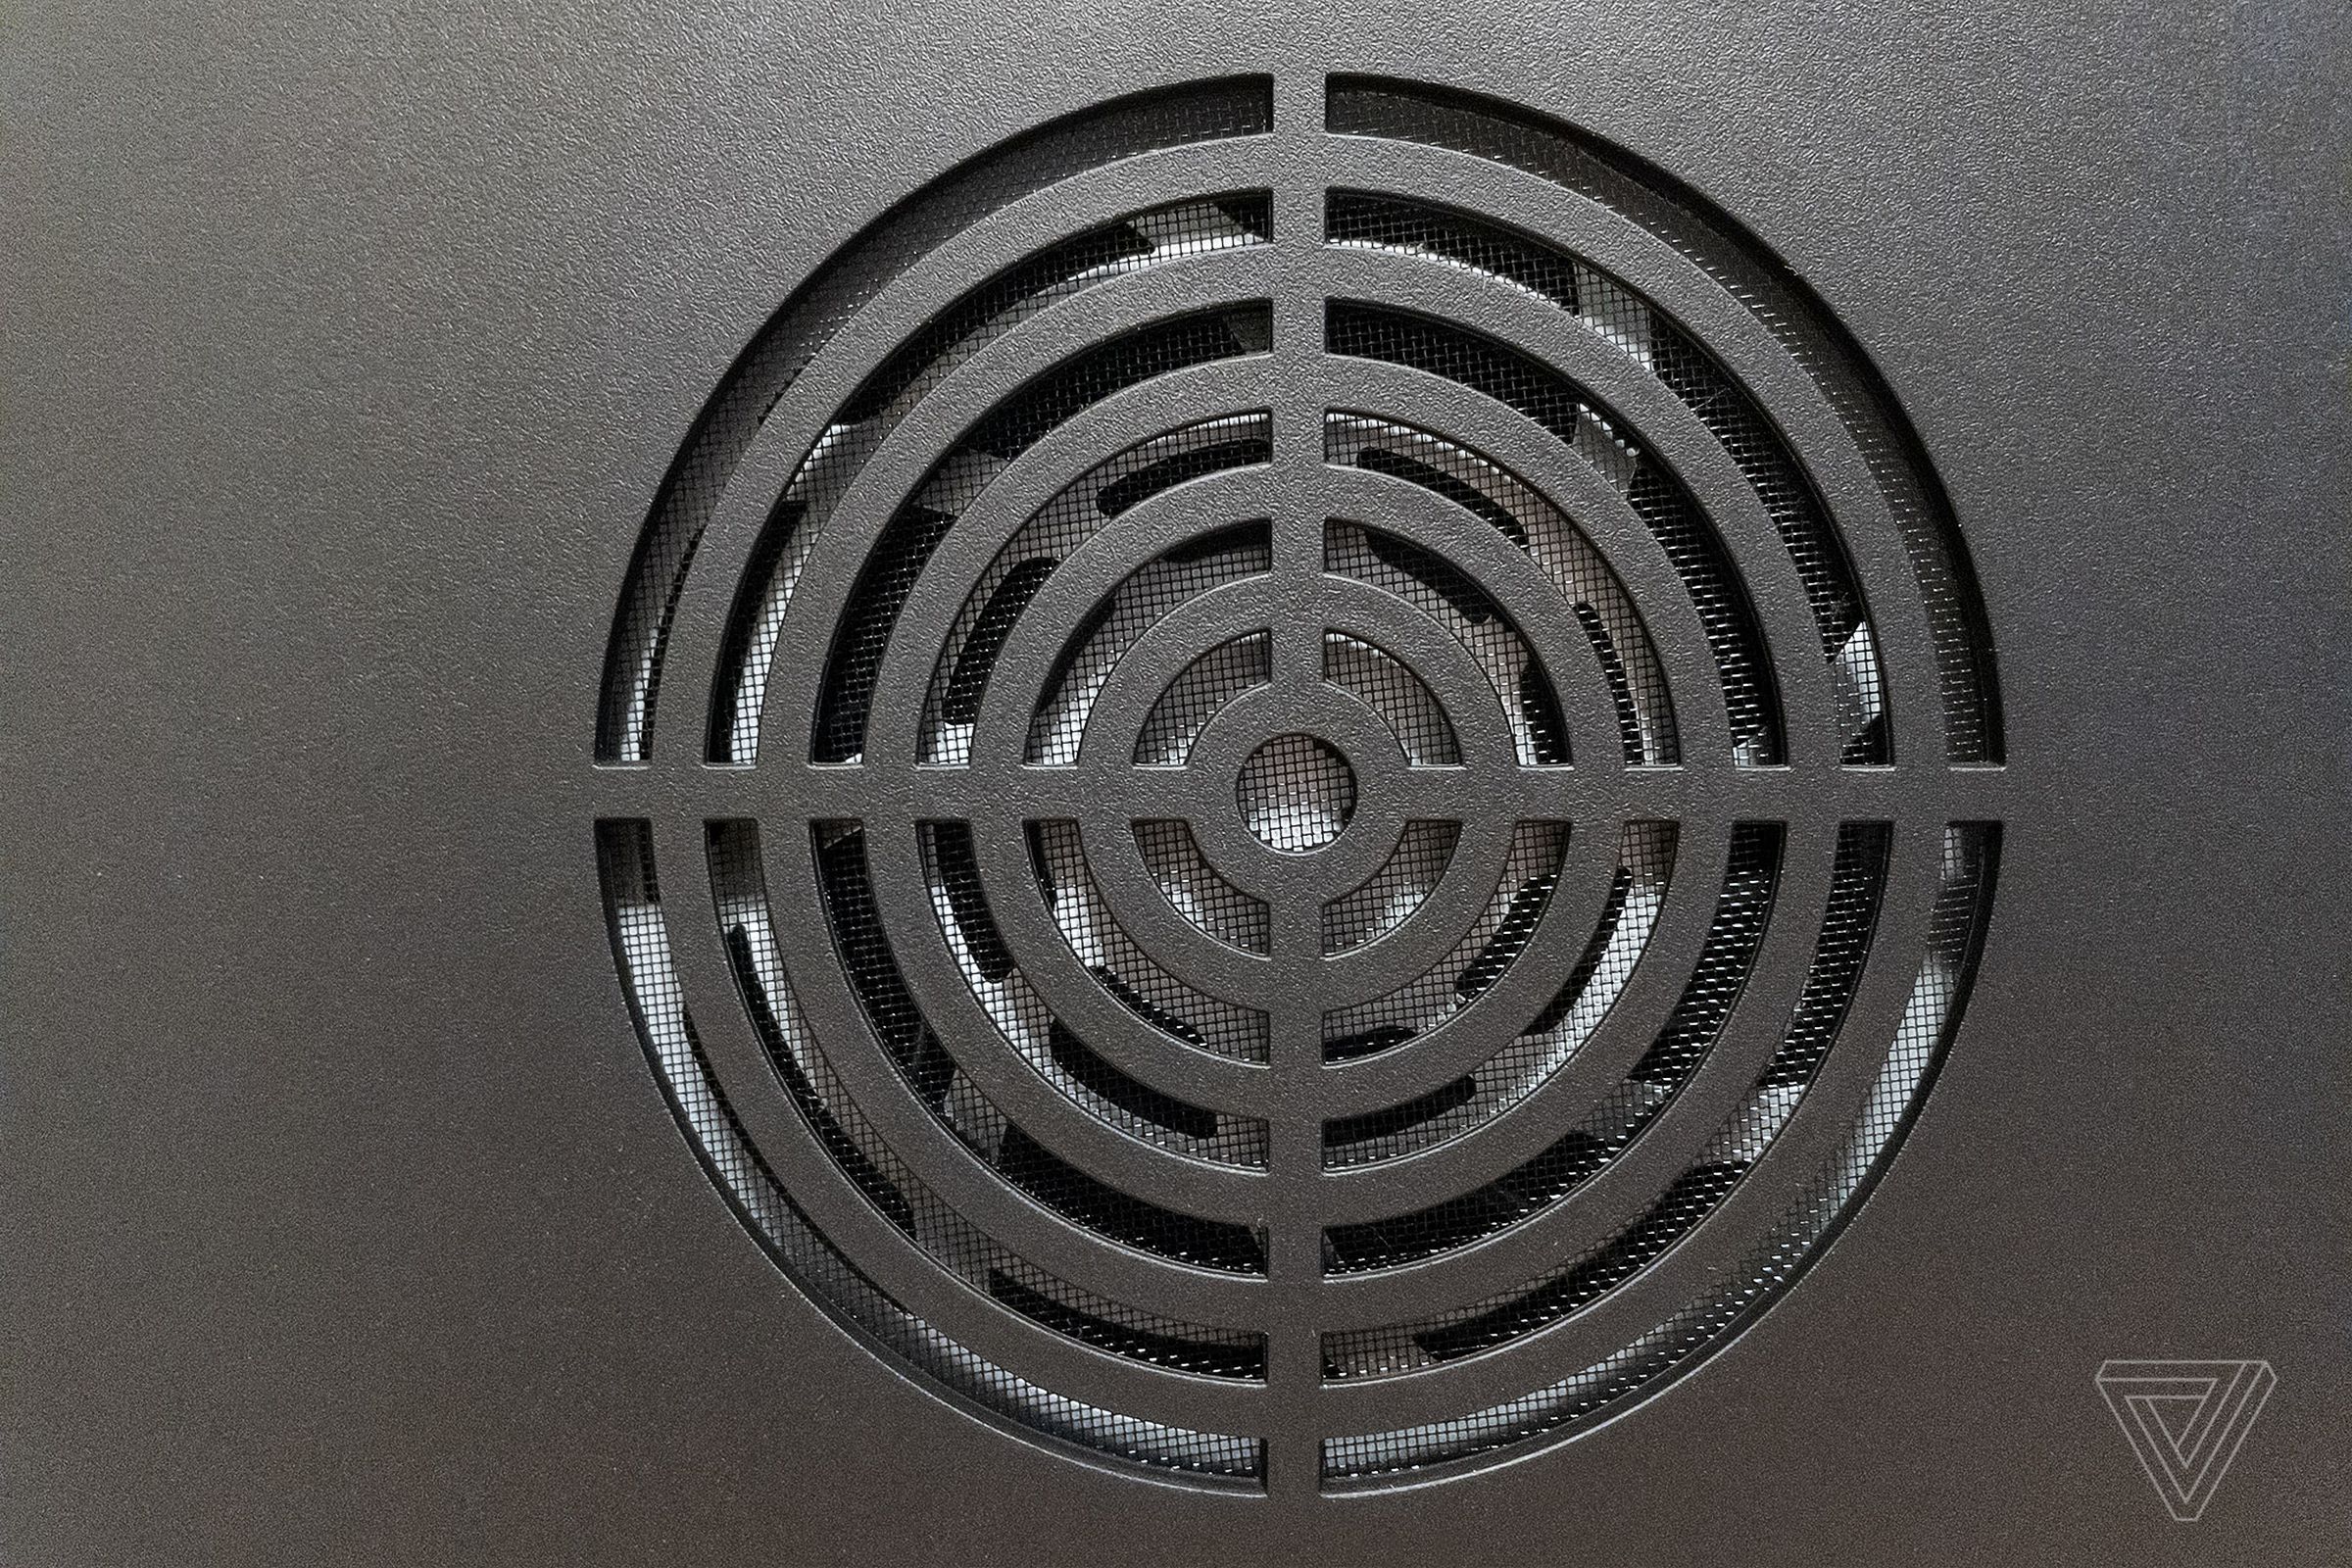 Here’s a closer look at the grille, where you can see the removable mesh grille on the inside.